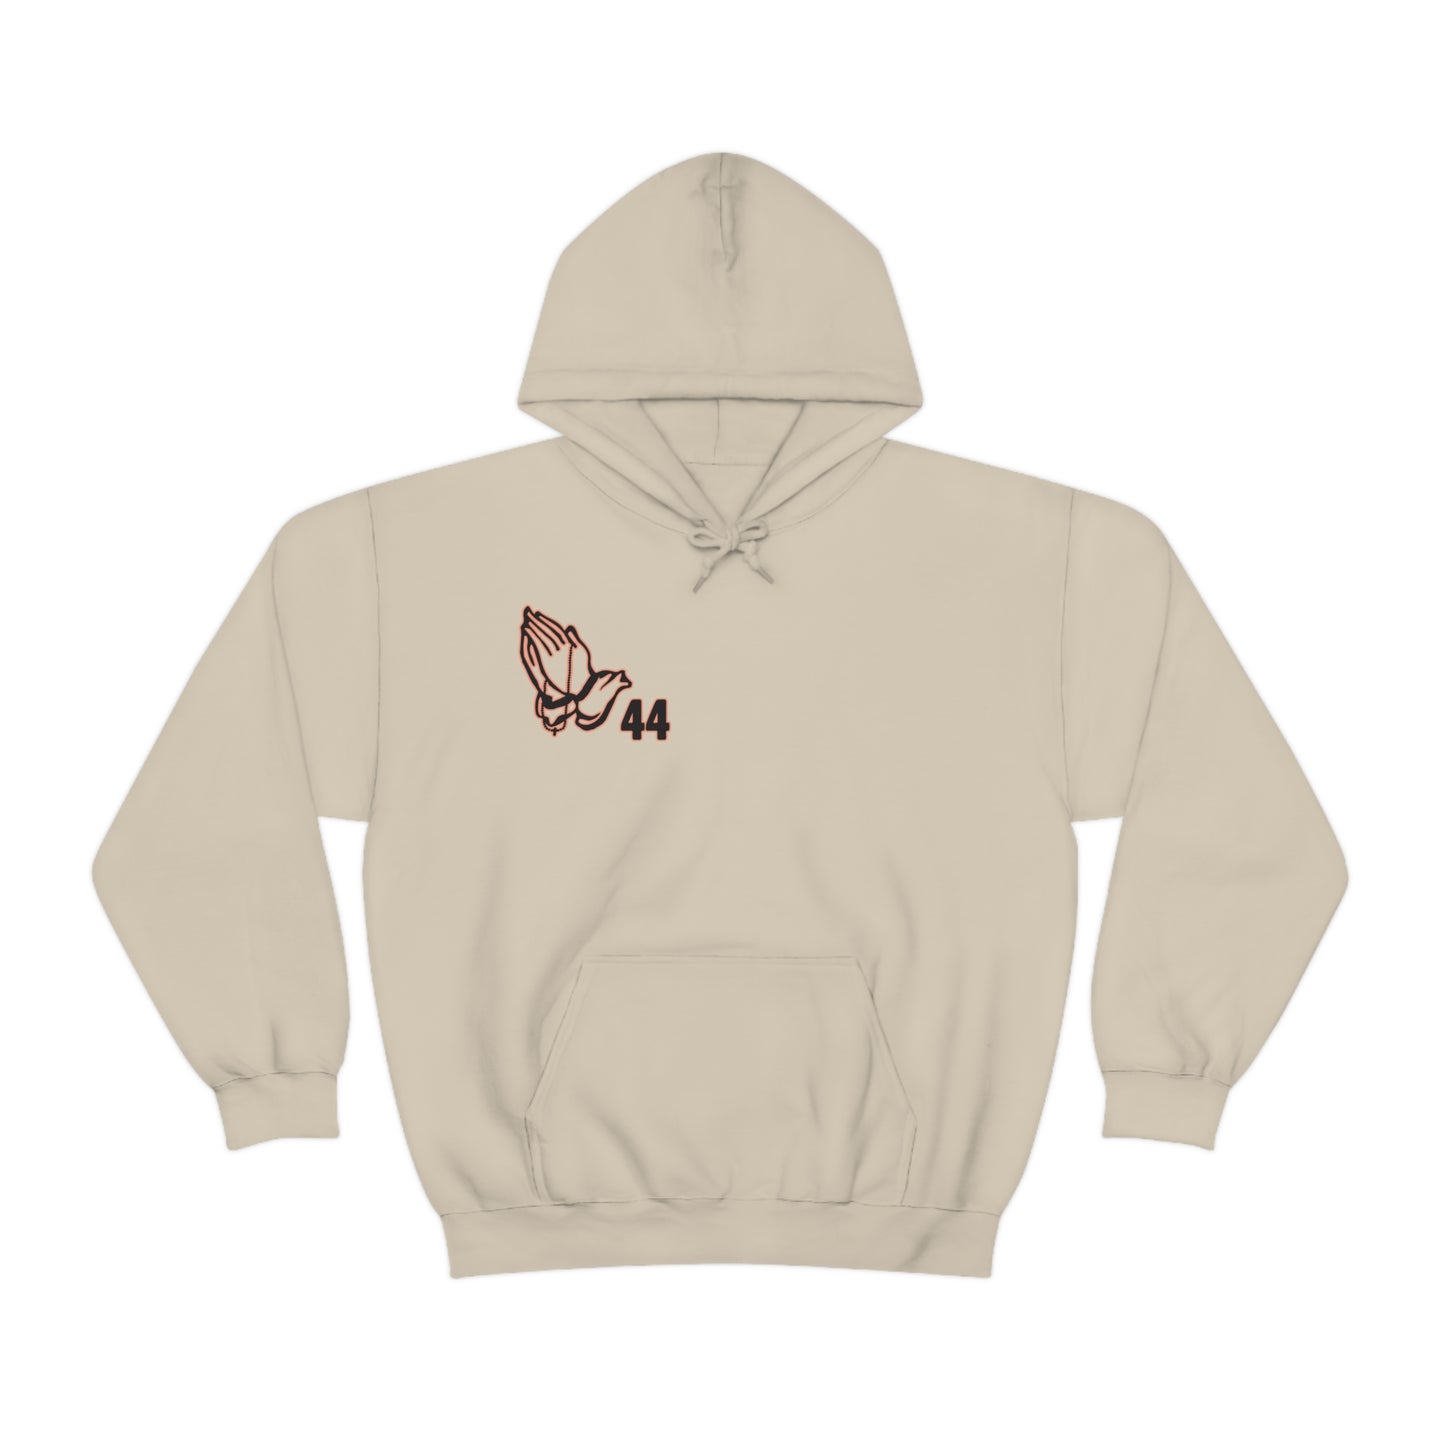 Tallen Edwards: The Lord Will Fight For You Hoodie